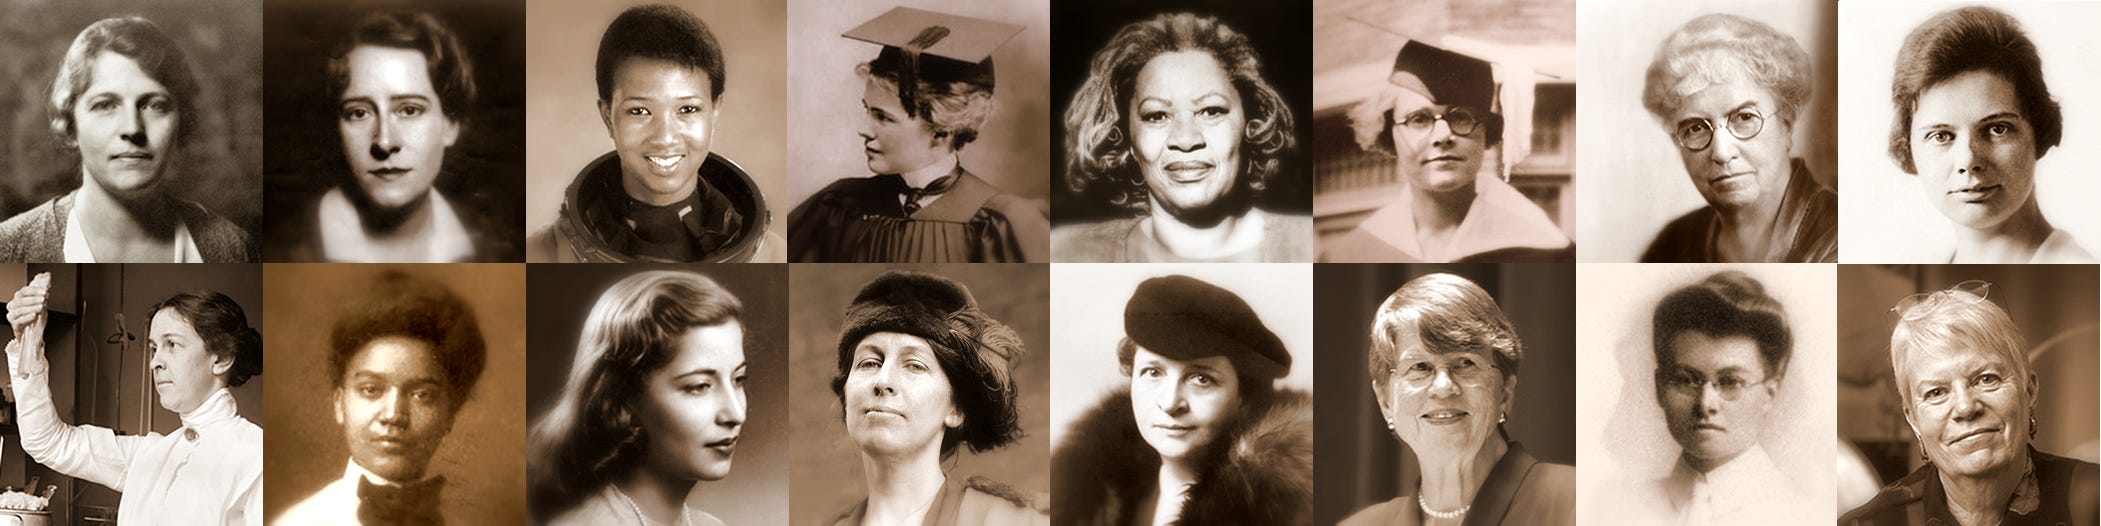 Women Of The Ages